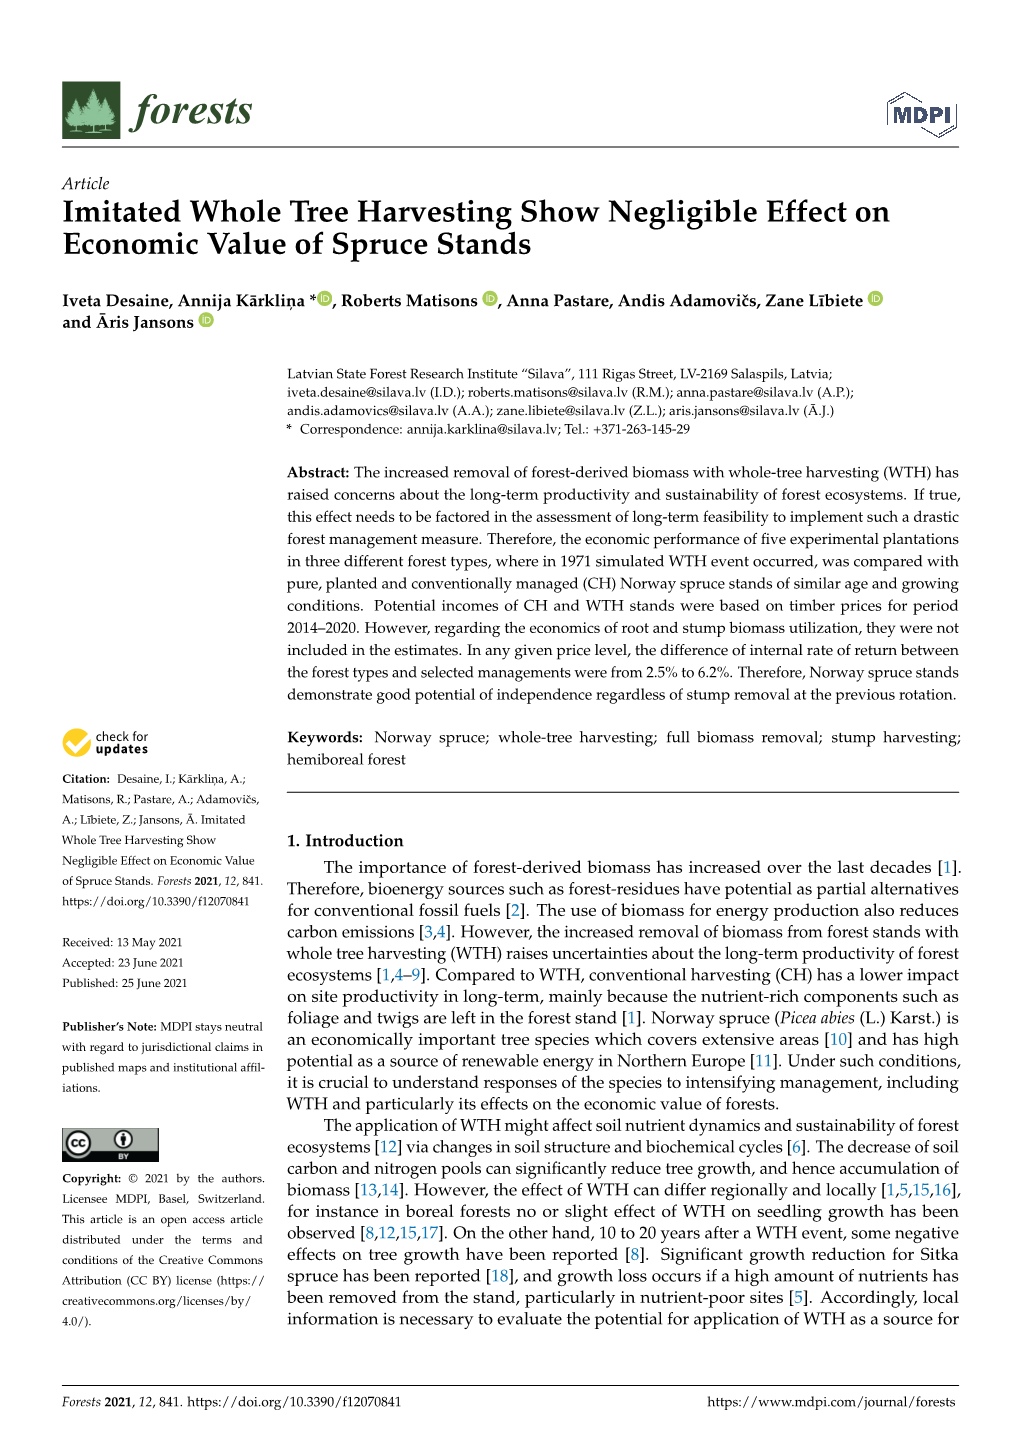 Imitated Whole Tree Harvesting Show Negligible Effect on Economic Value of Spruce Stands